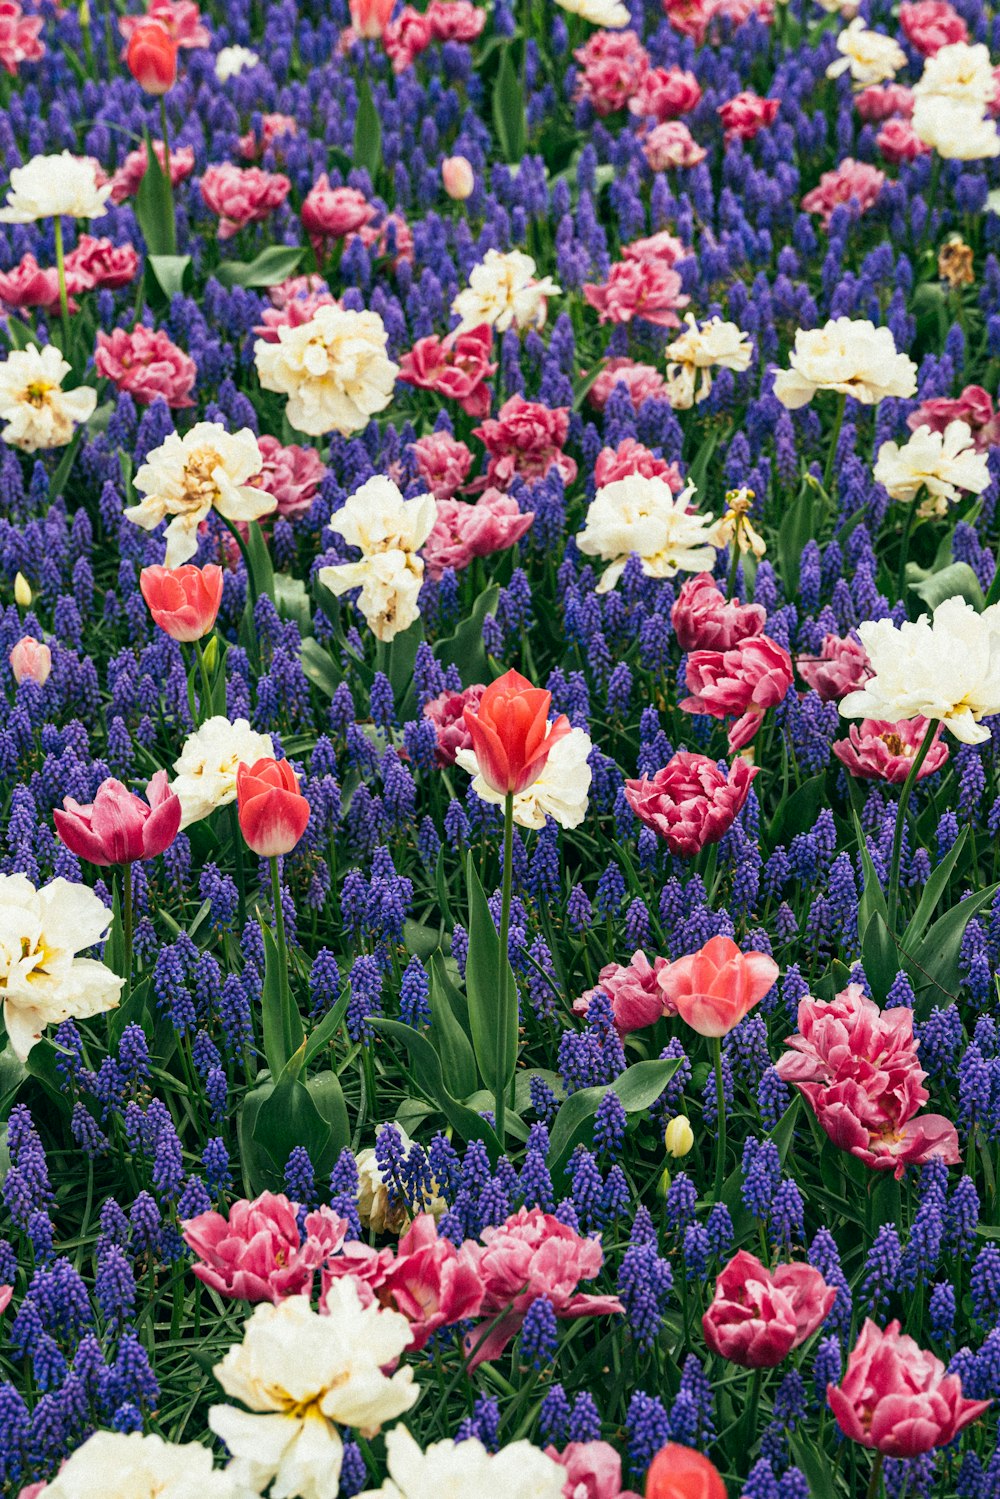 a field of colorful flowers with purple and white ones